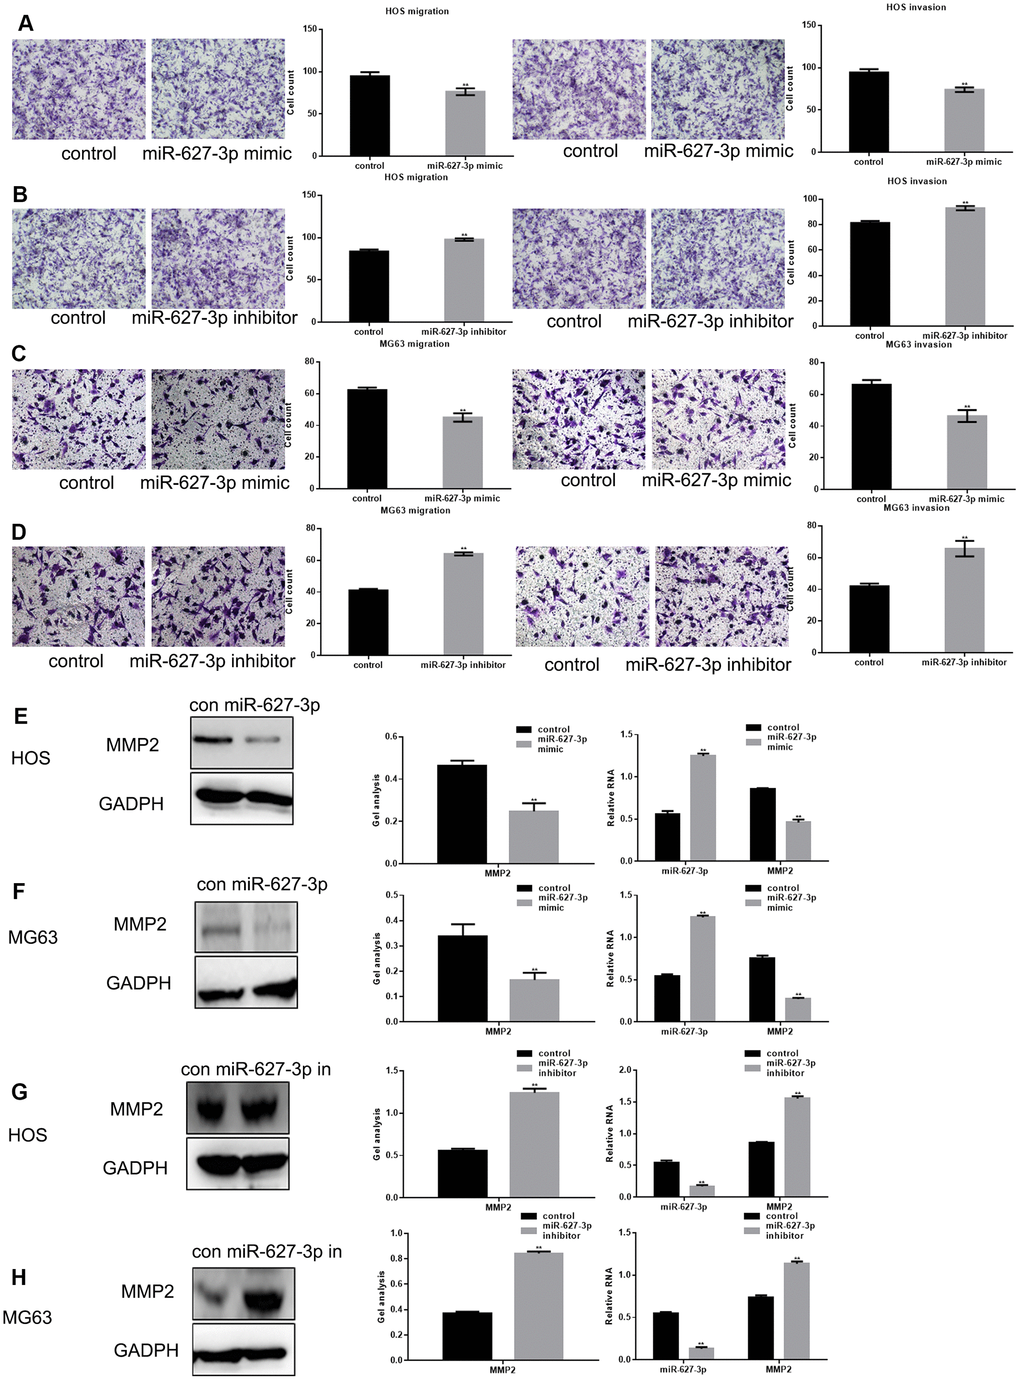 MiR-627-3p inhibits osteosarcoma cell metastasis. (A–D) After overexpression/inhibition of miR-627-3p in HOS and MG63 cells, Transwell assays with or without Matrigel were performed, and counts of migrated cells were made. The results represent the mean ± SD of three experiments. ** PE–H) Western blot and real-time PCR analyses of MMP2 expression in osteosarcoma cells transfected with miR-627-3p mimic/inhibitor. Data are shown as mean ± SEM. ** P